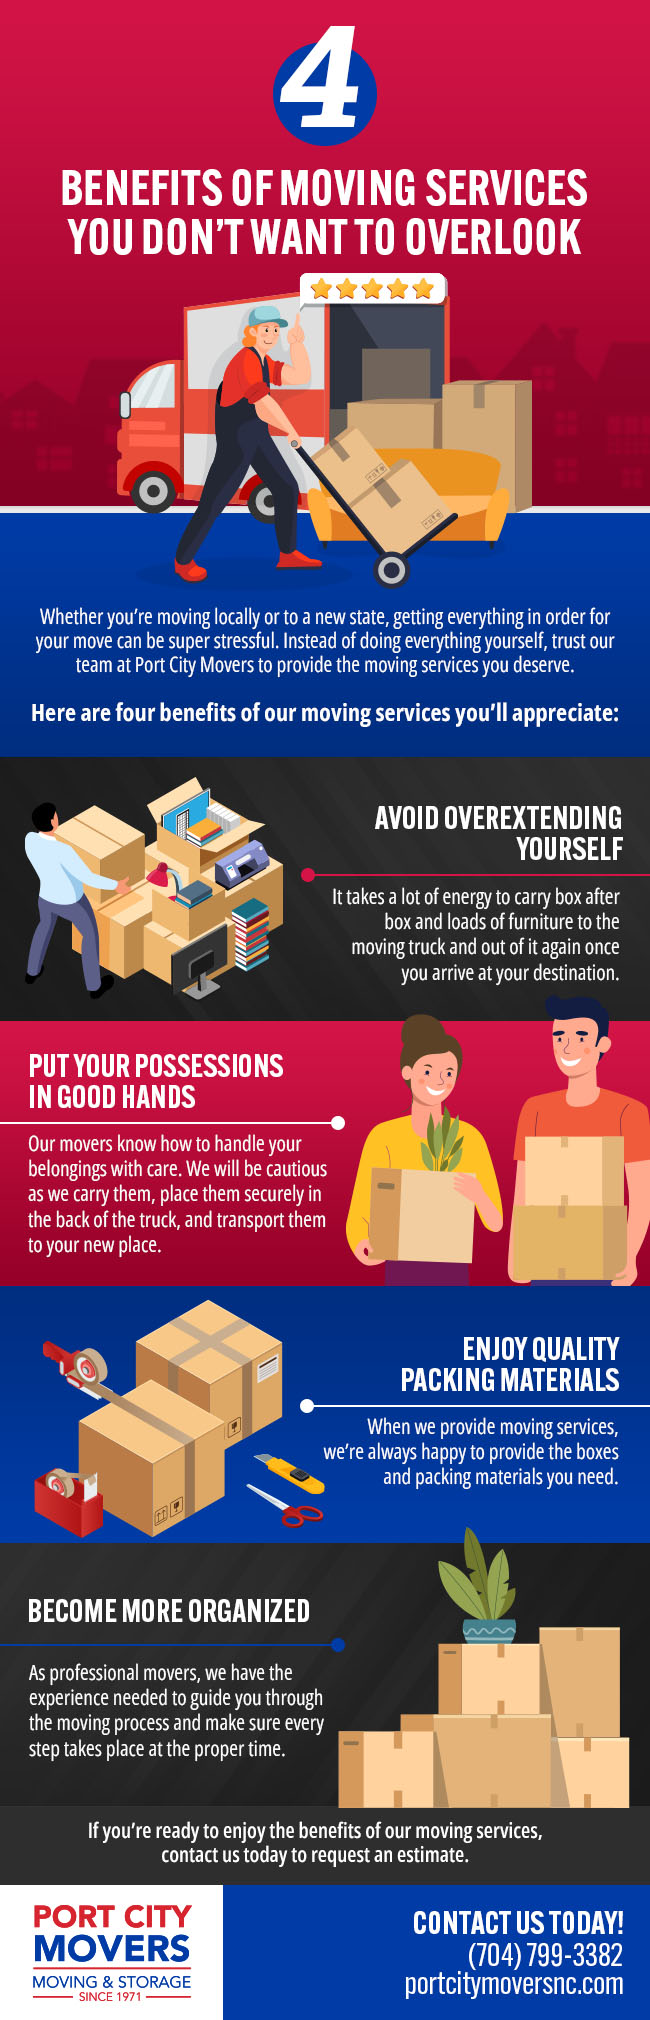 4 Benefits of Moving Services You Don’t Want to Overlook